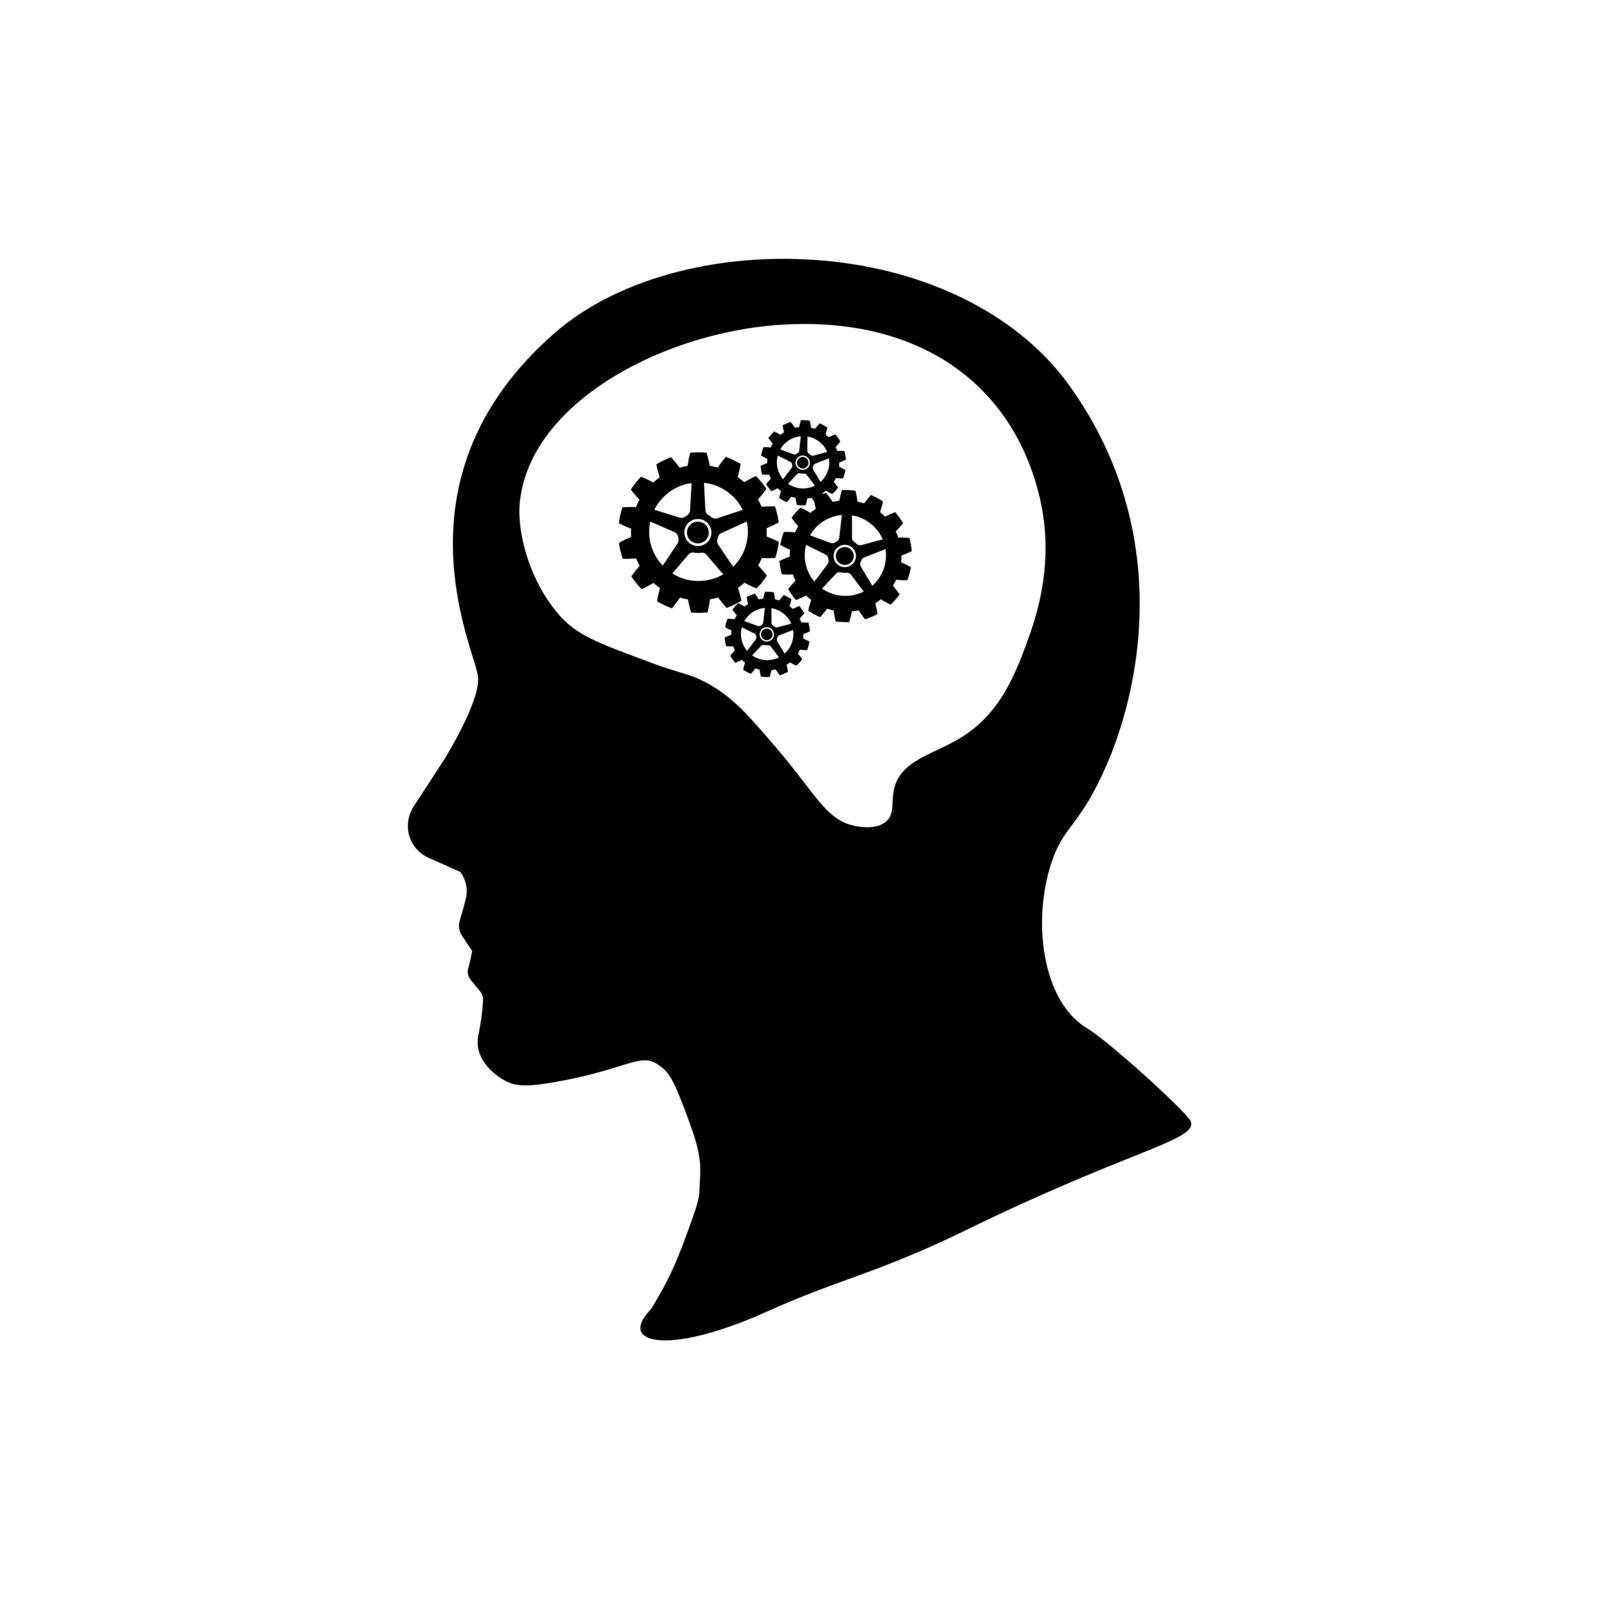 Silhouette of head and gear wheel. on white background. vector illustration